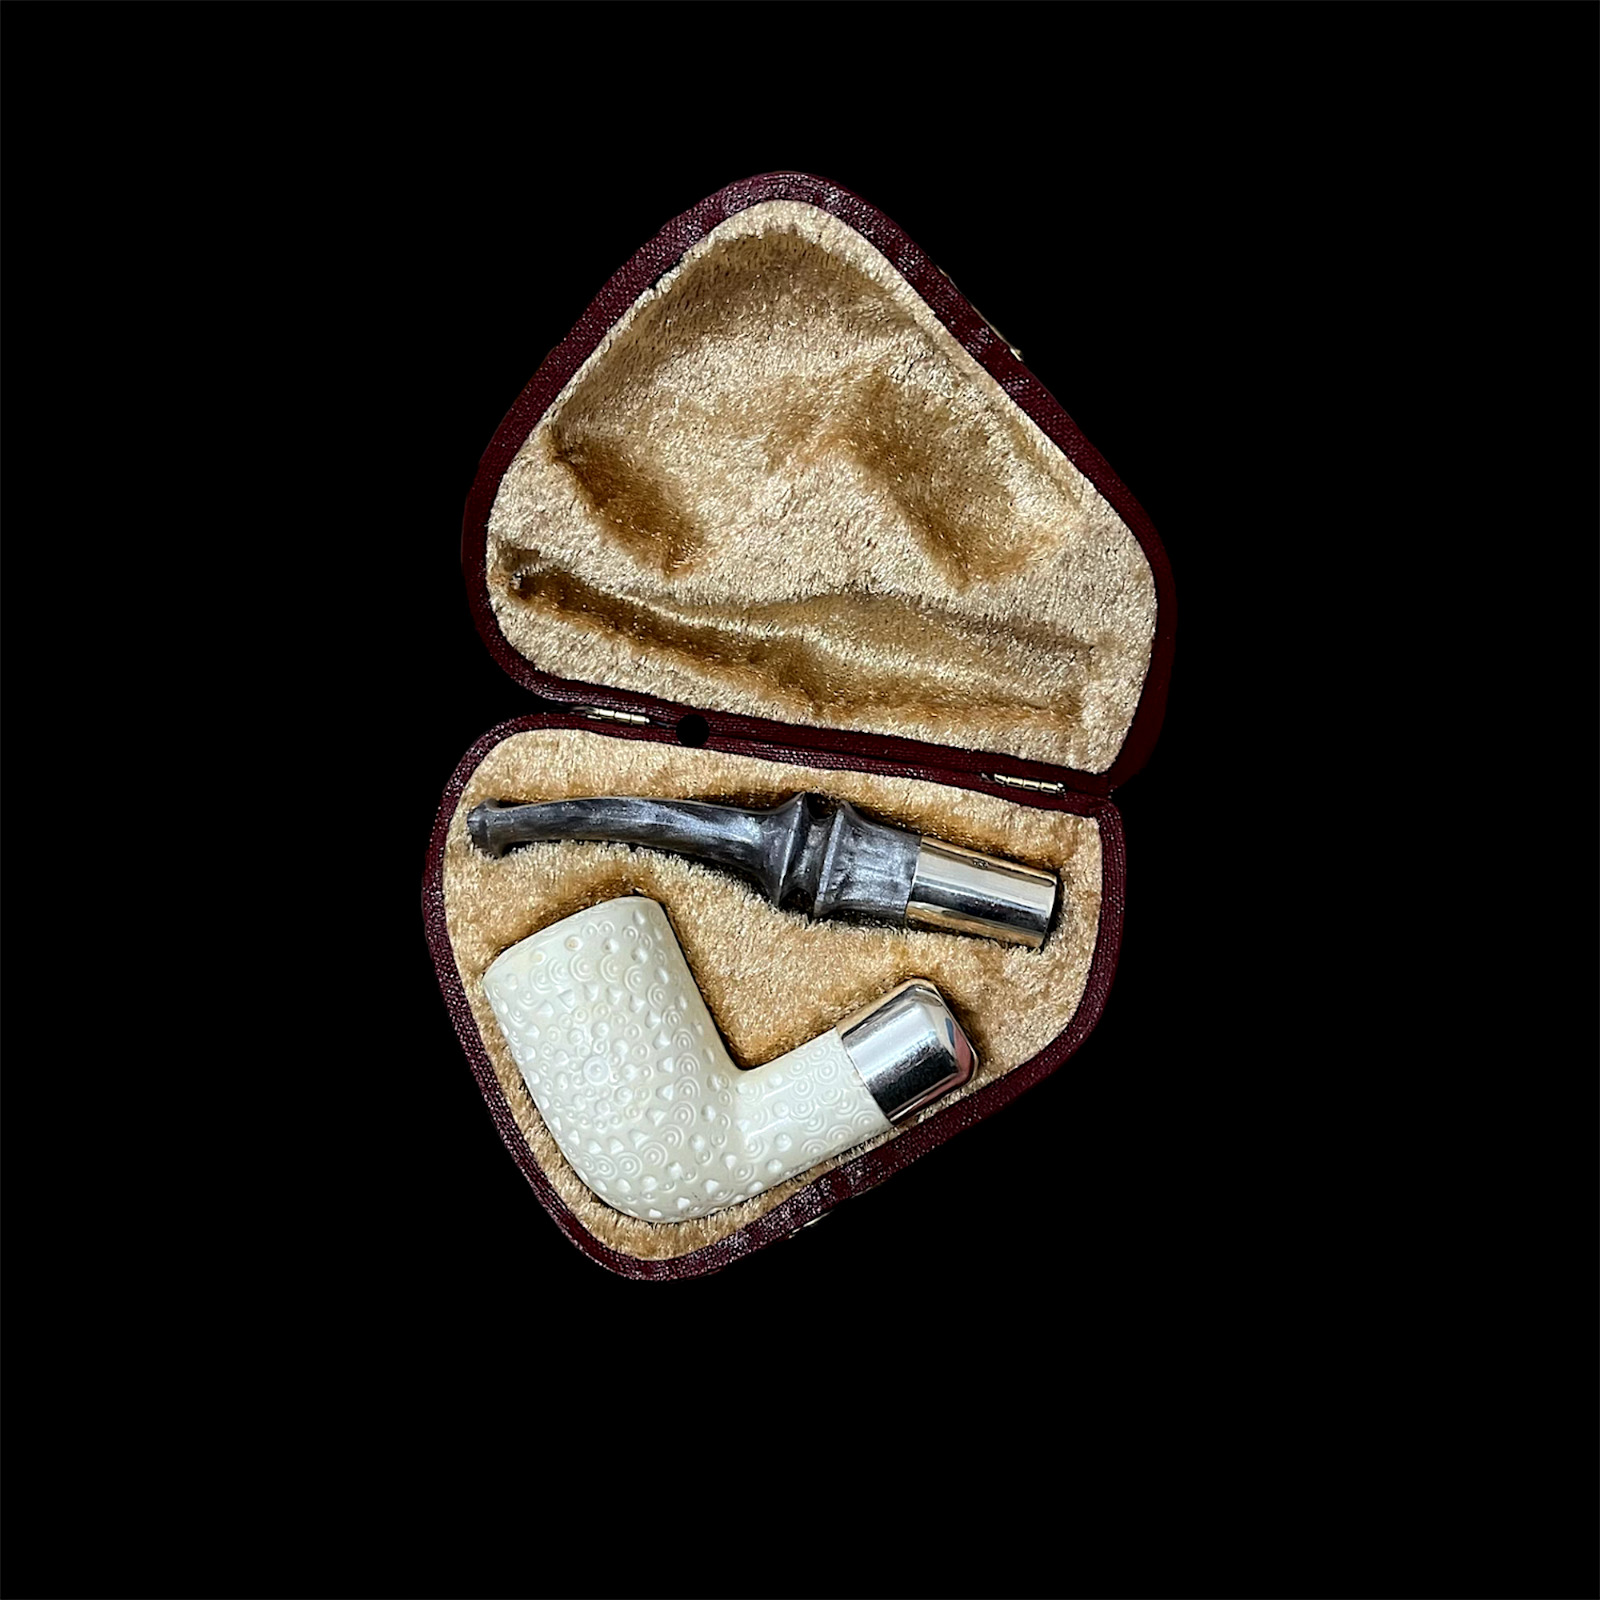 Block Meerschaum Pipe 925 silver unsmoked smoking tobacco pipe w case MD-334